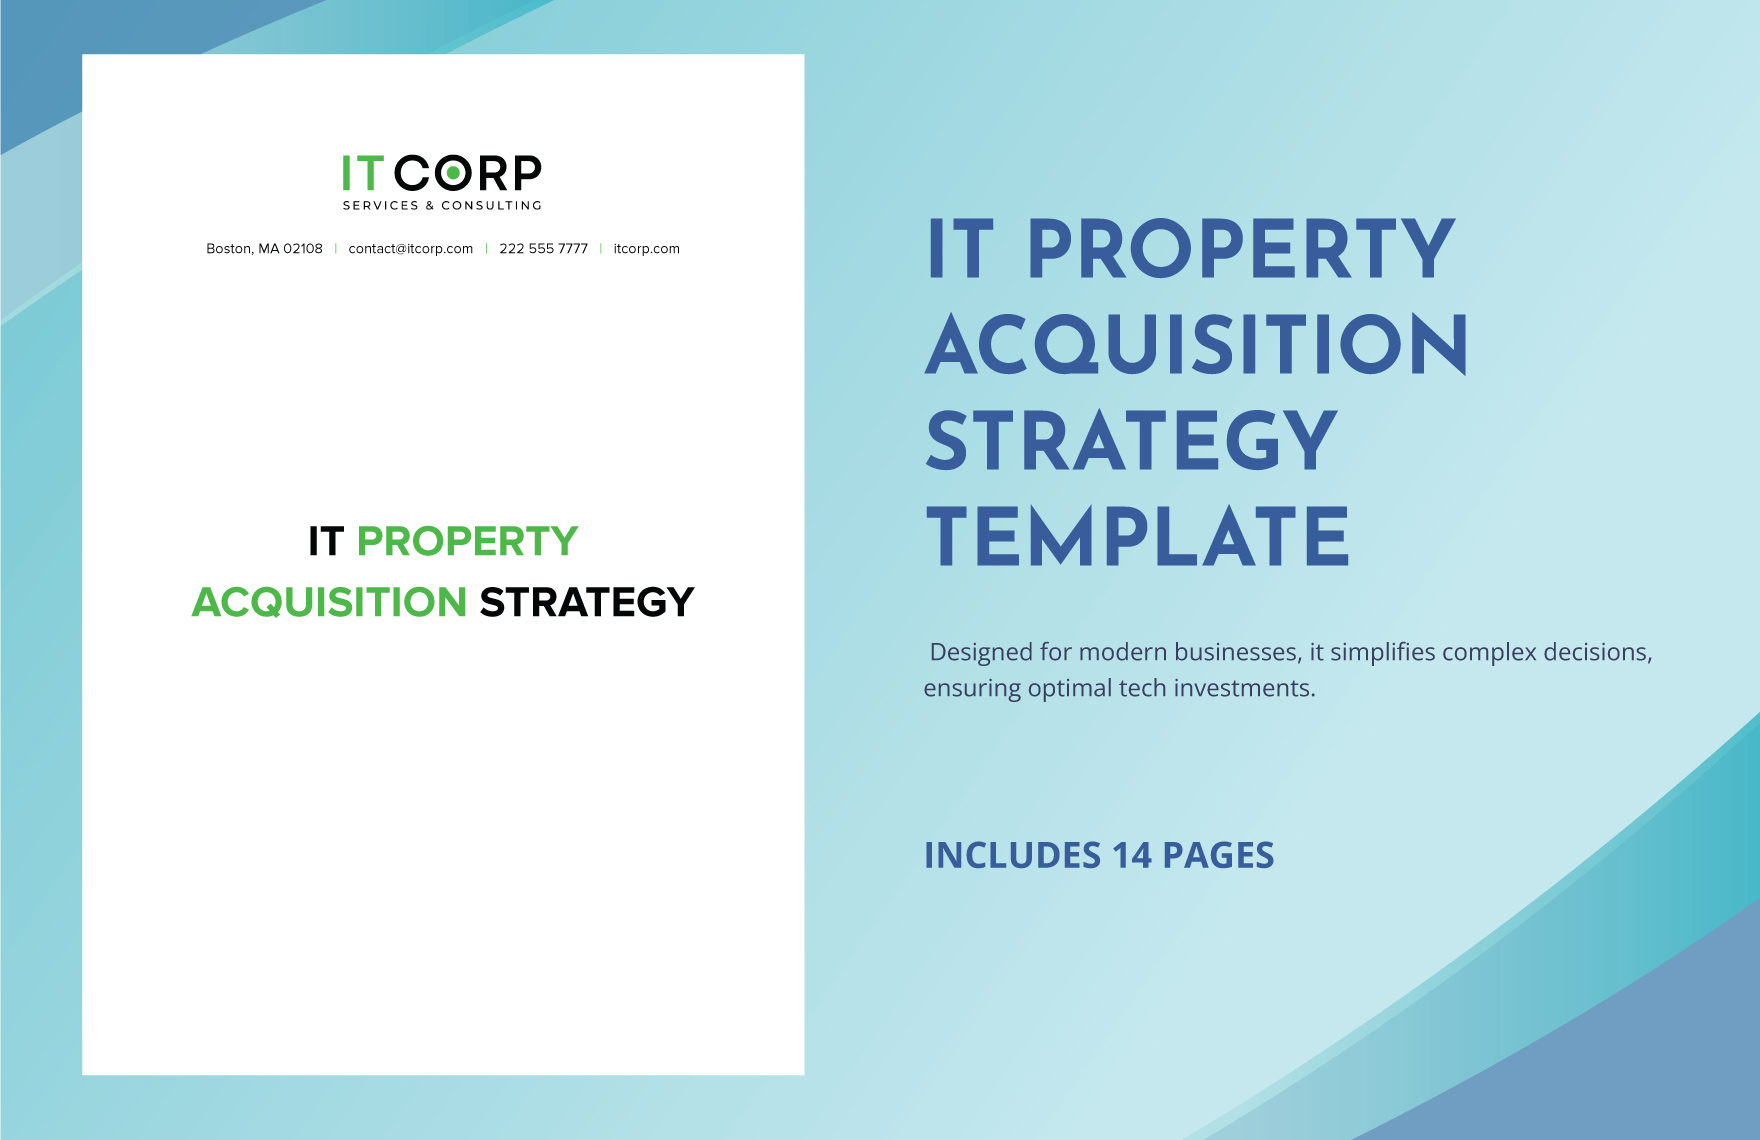 IT Property Acquisition Strategy Template in Word, Google Docs, PDF